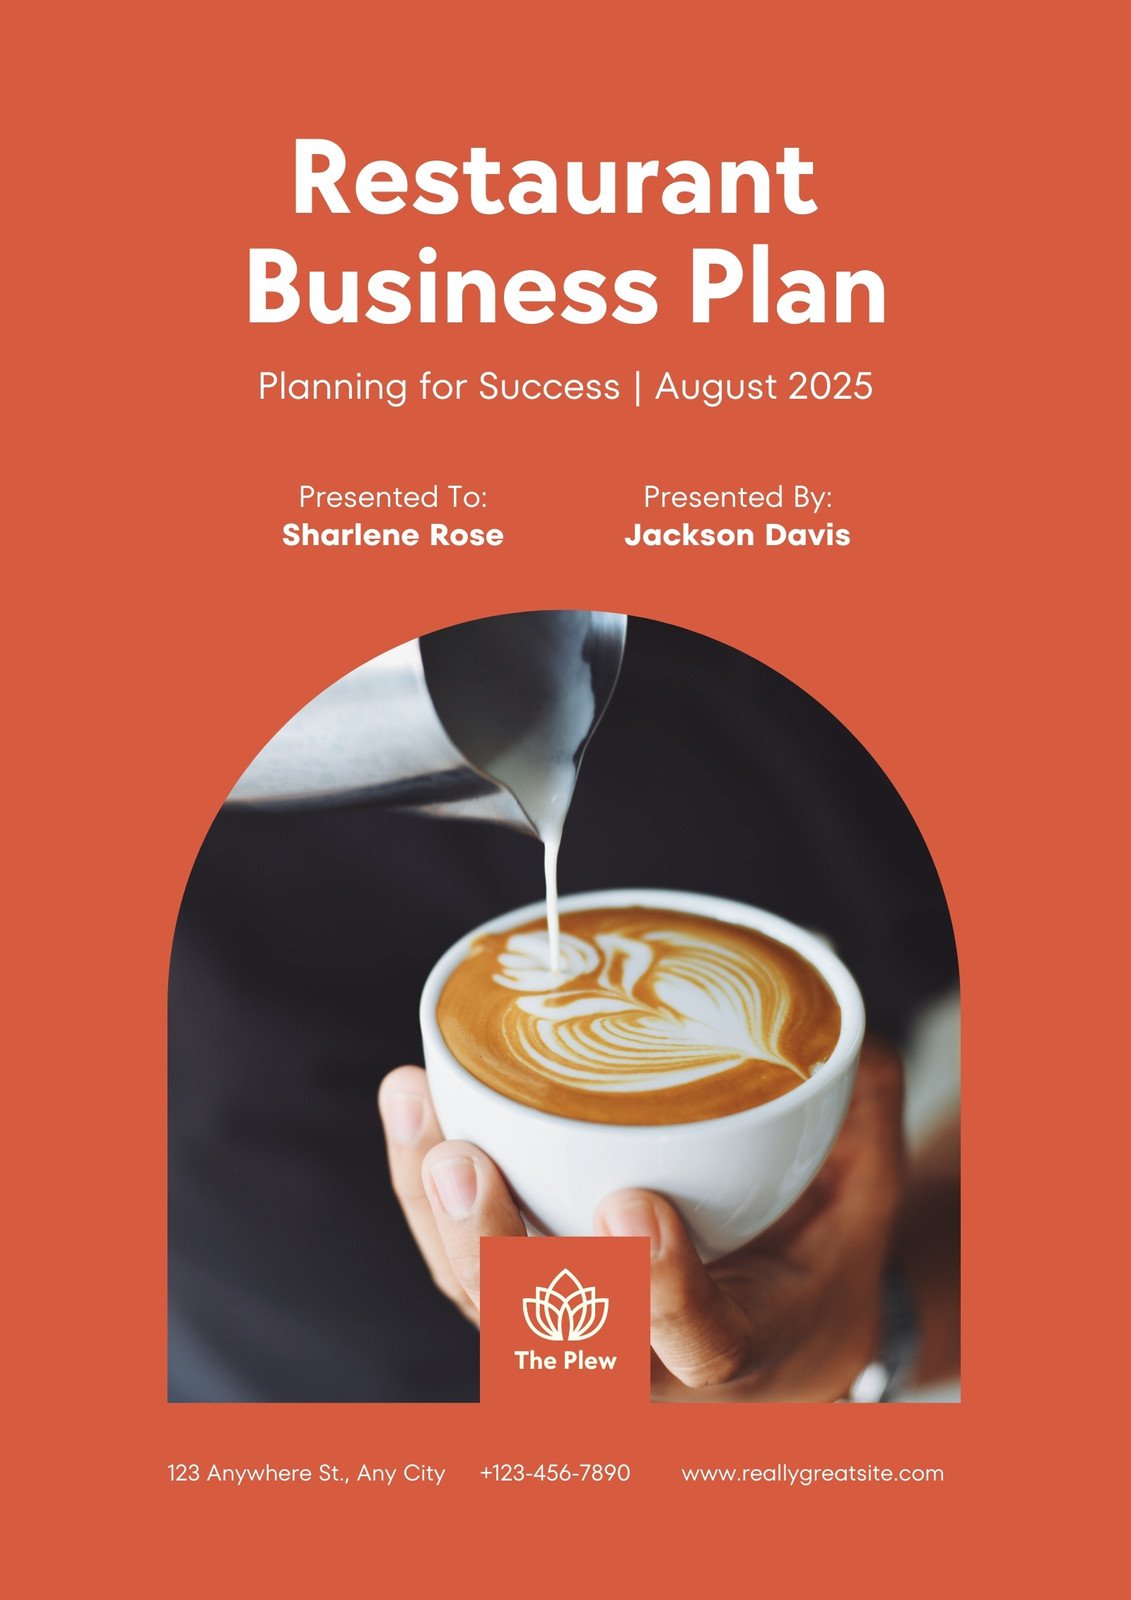 submit a business plan for